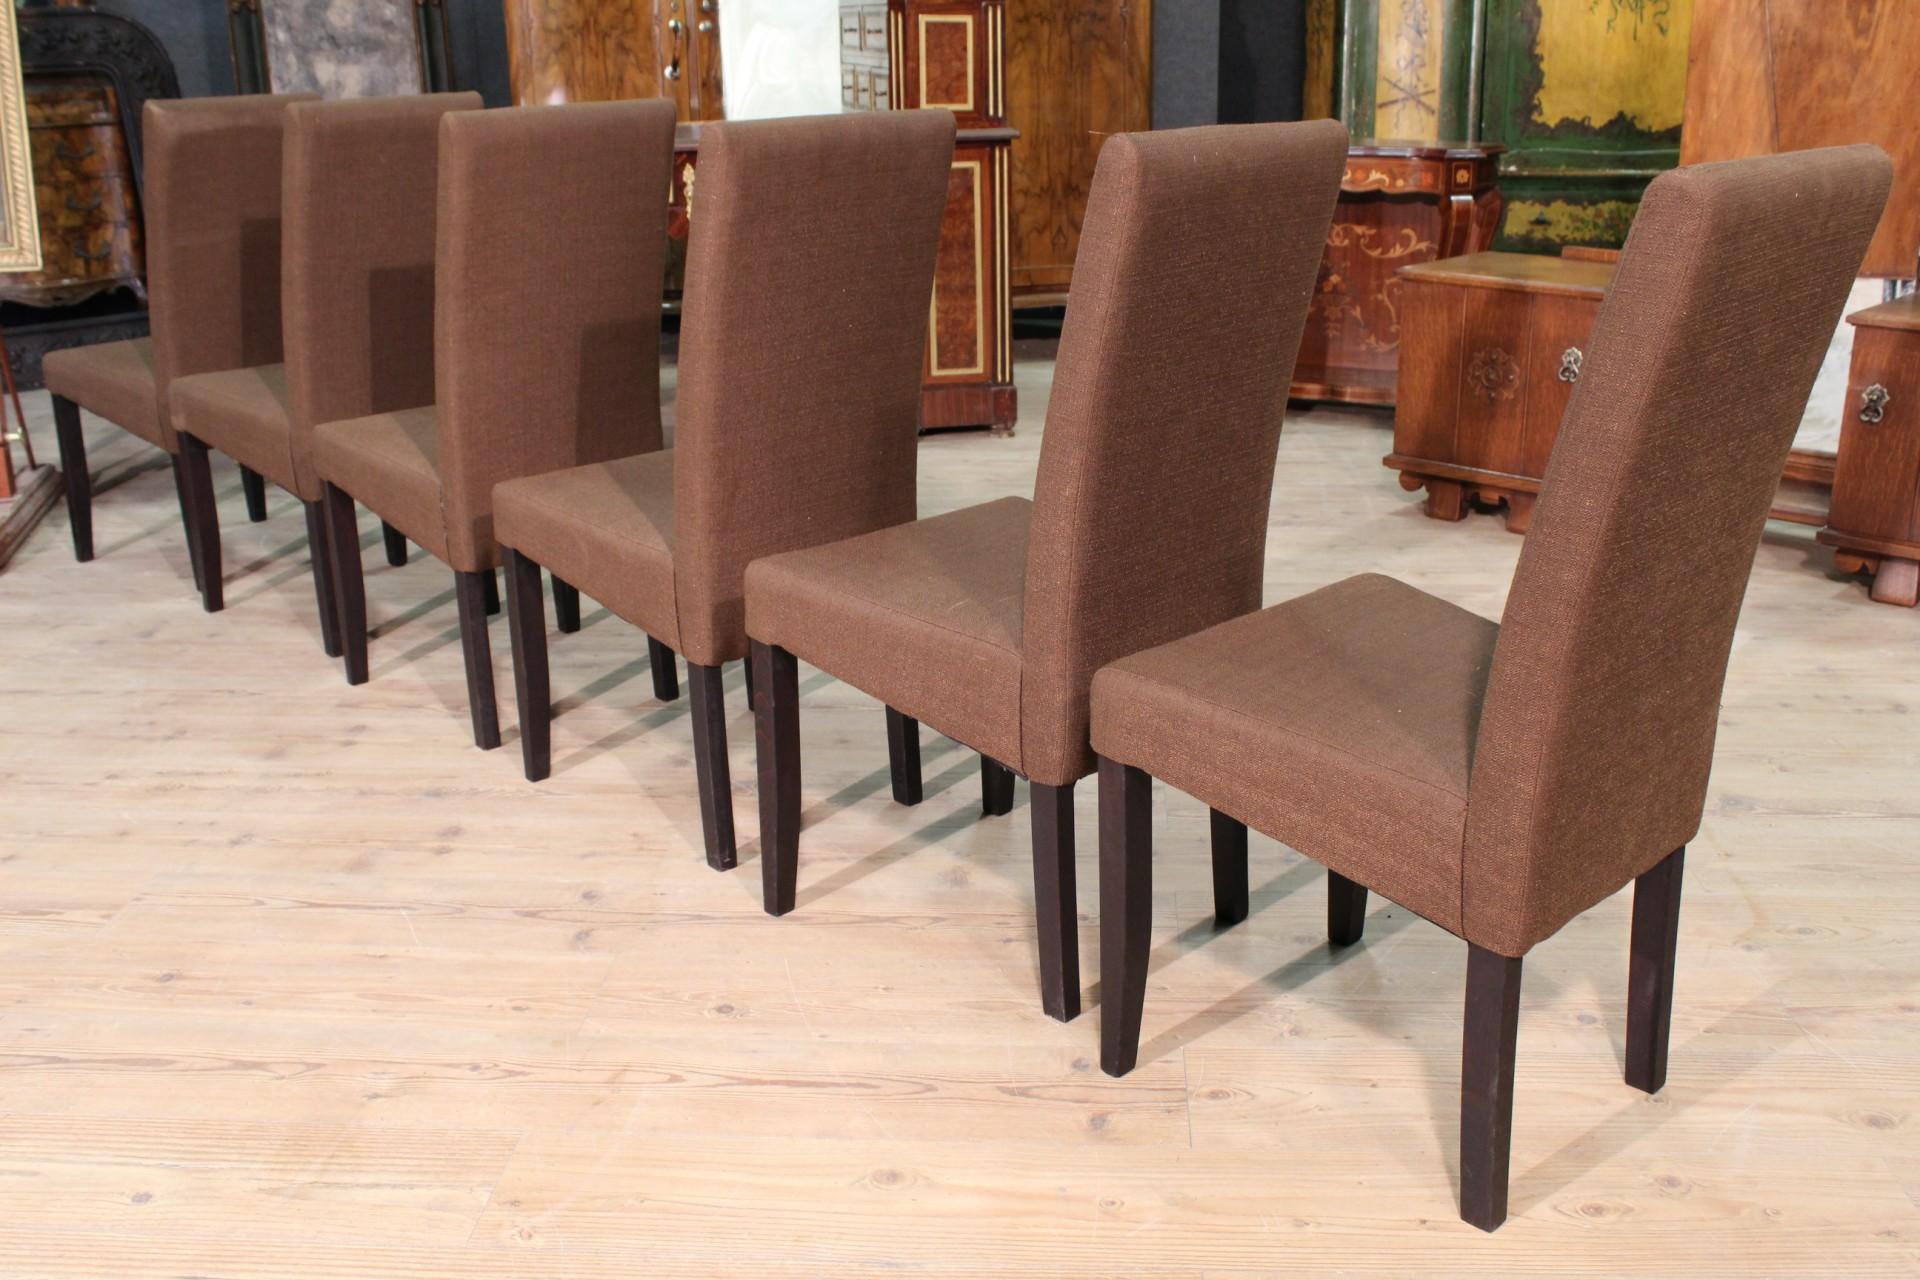 European Group of 6 Chairs Covered in Fabric, 20th Century For Sale